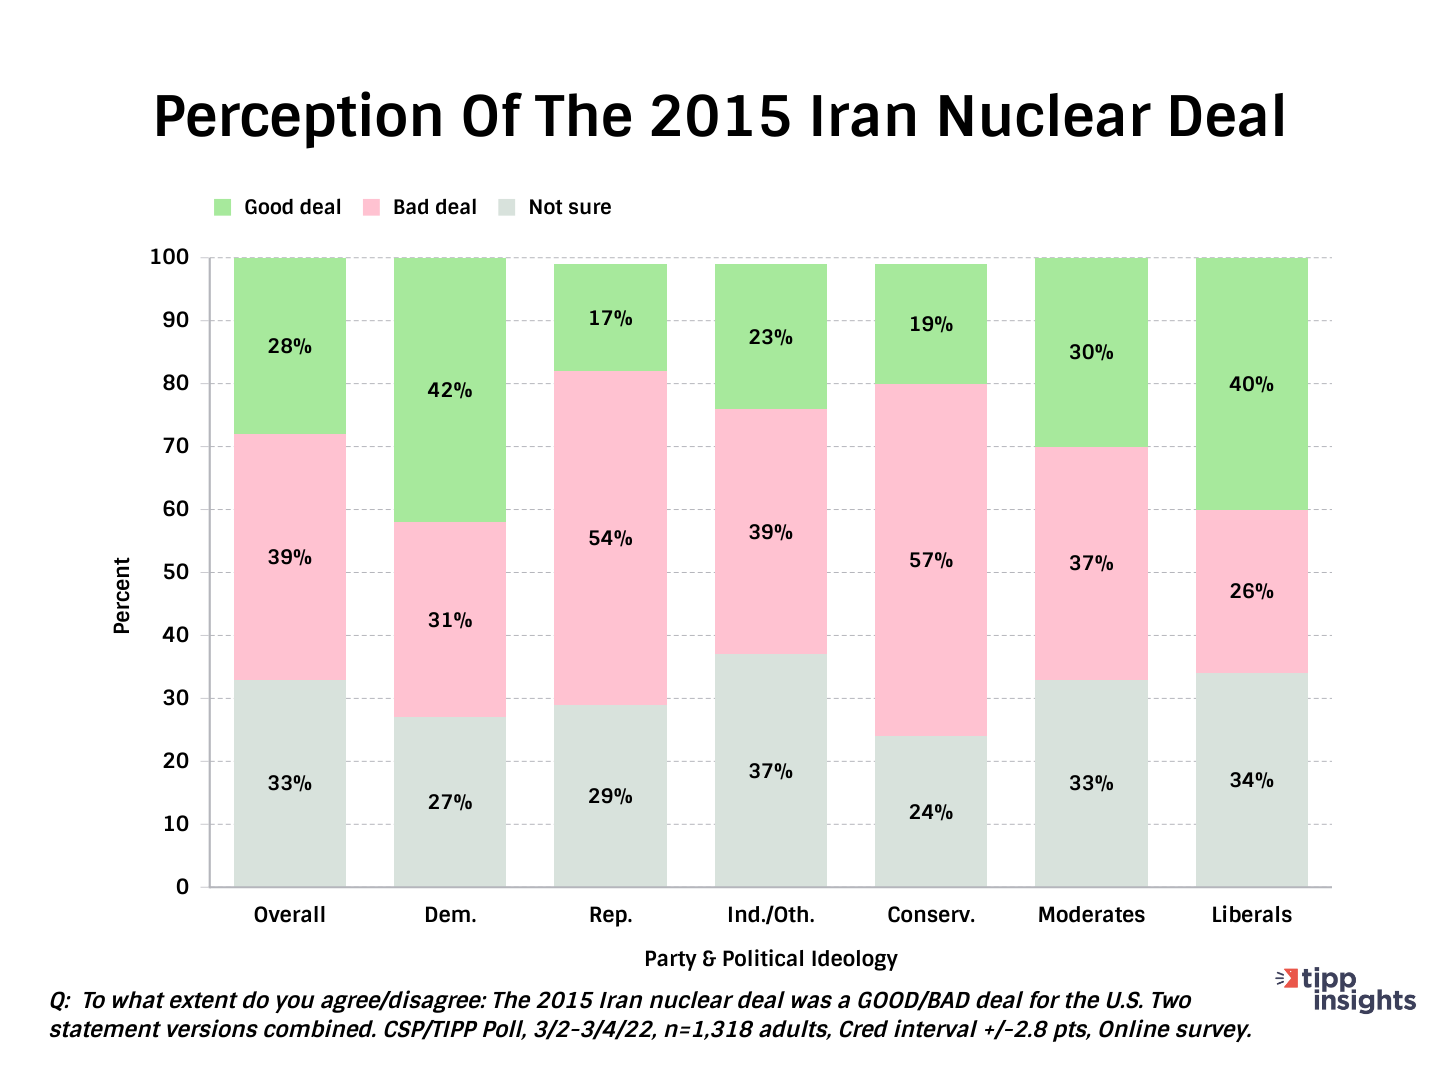 CSP/TIPP Poll Results: Americans perception of the 2015 Iran Nuclear Deal (JCPOA)